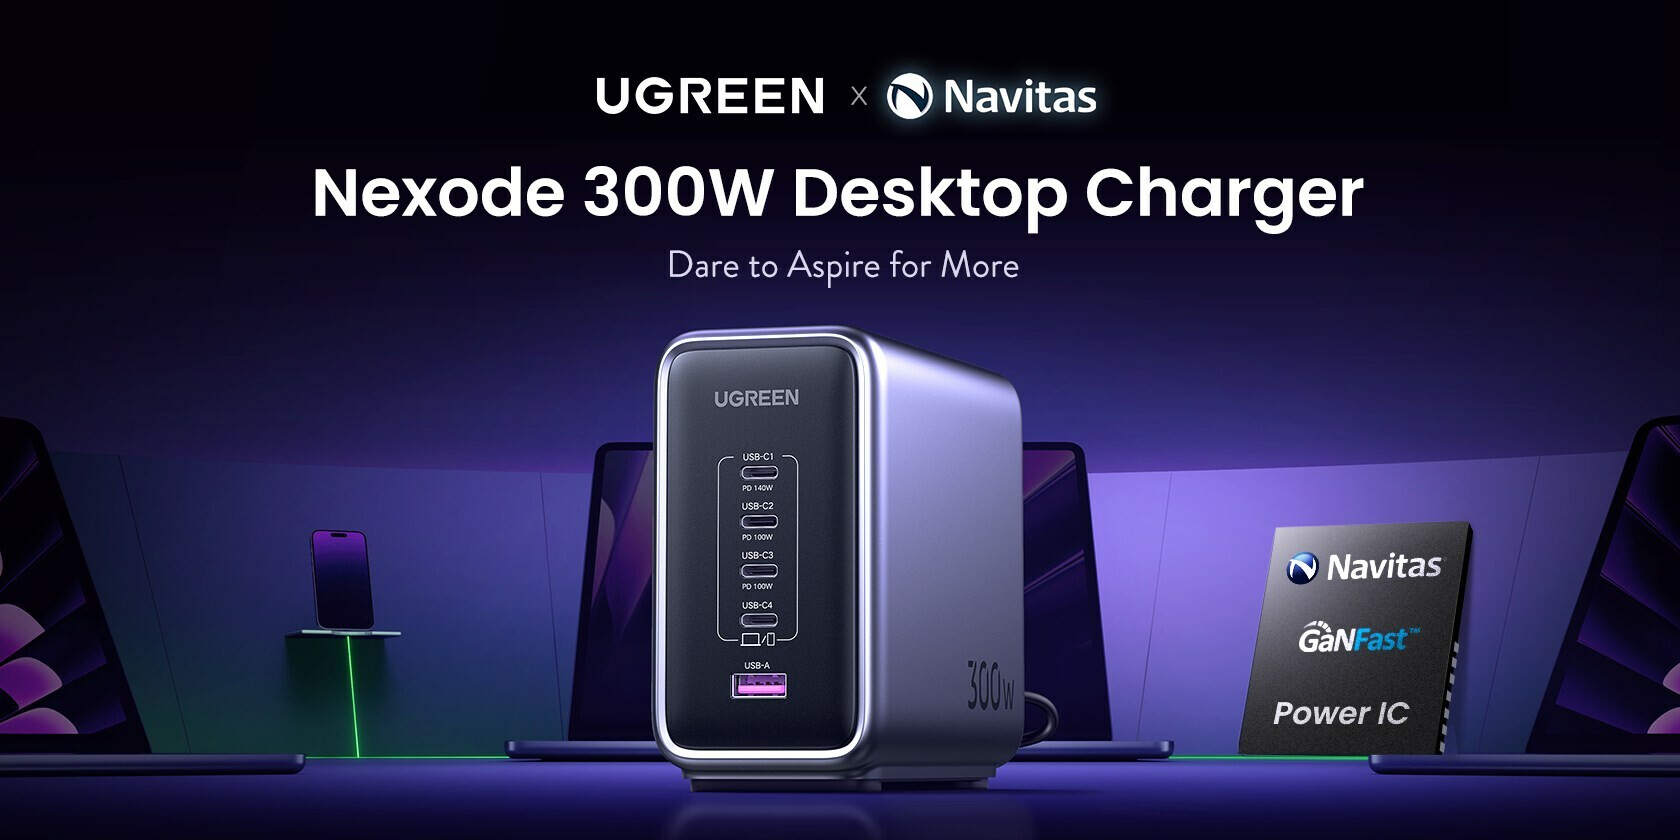 Ugreen unveils the inaugural GaNFast Desktop Charger with 5 ports and 300W power.